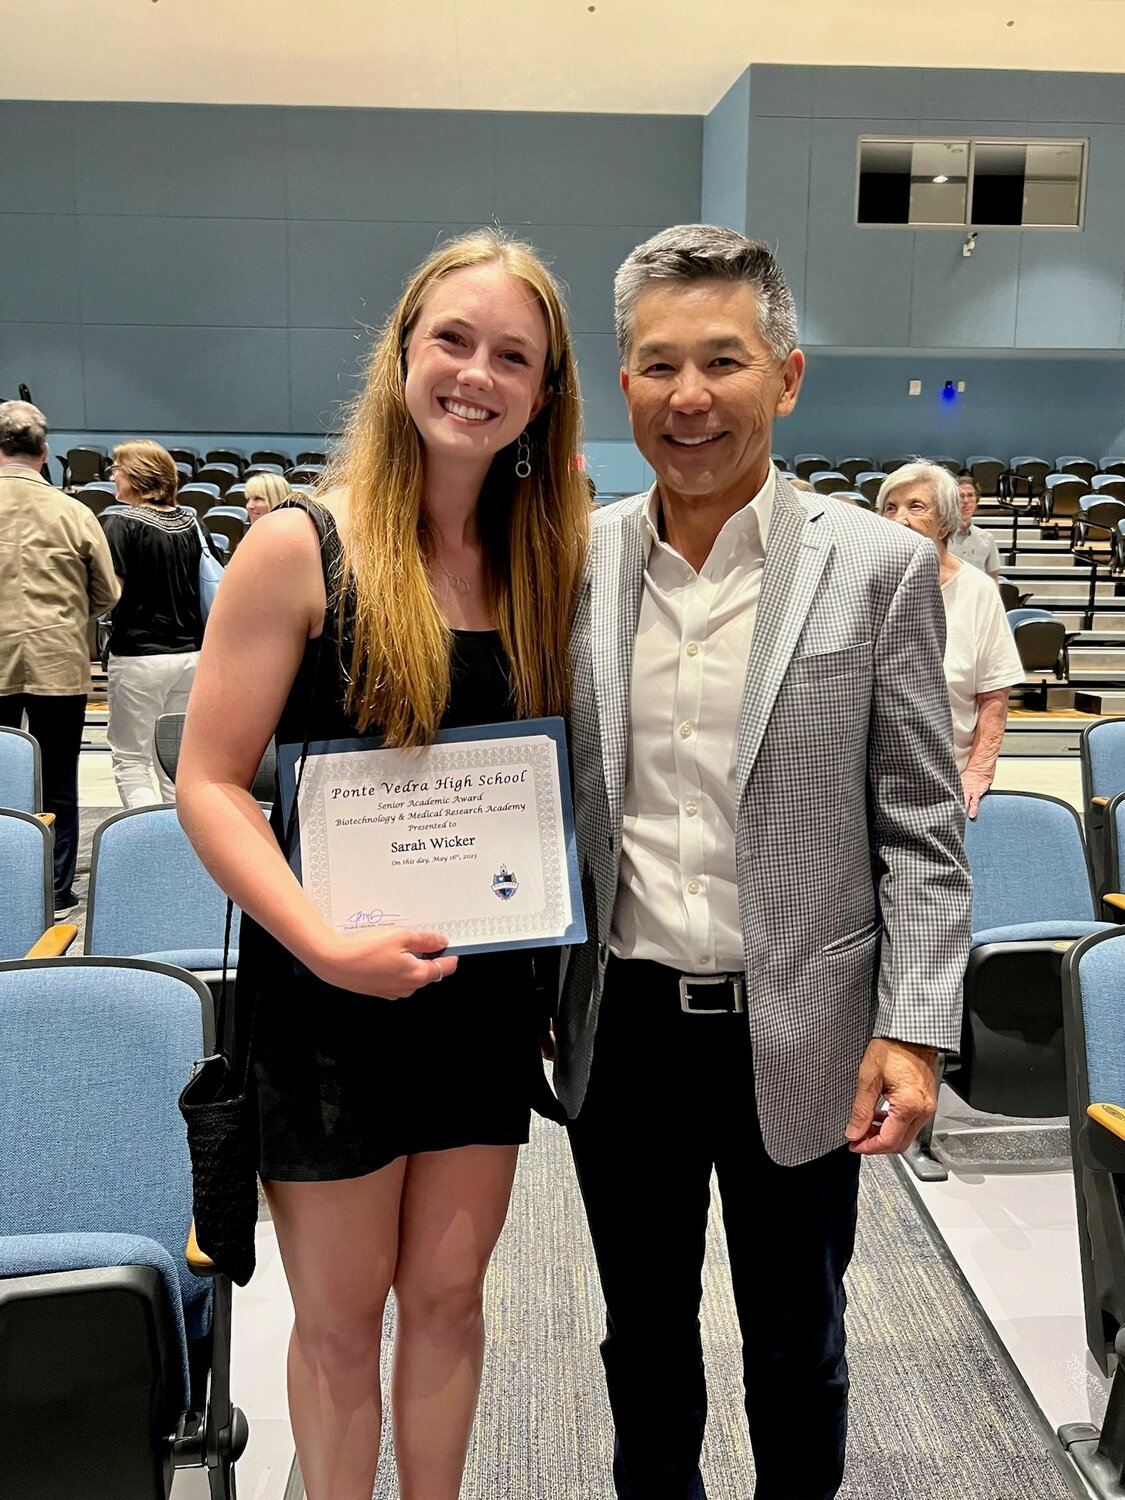 Wicker with Quang Pham, who presented the biotech scholarship she received.